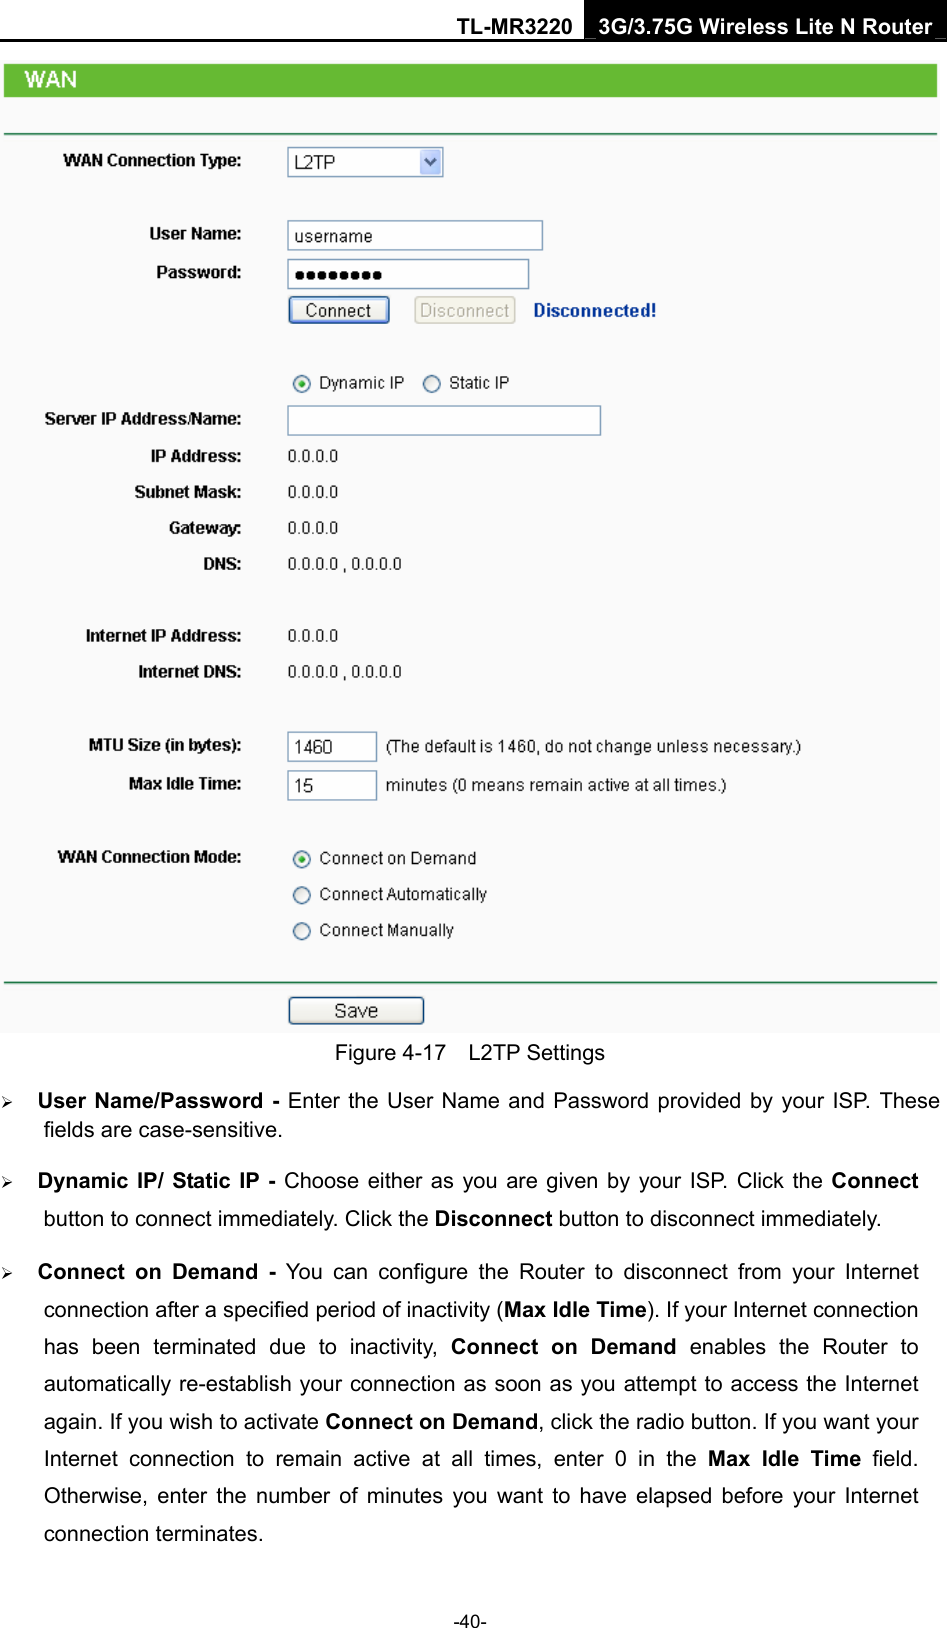 TL-MR3220 3G/3.75G Wireless Lite N Router -40-  Figure 4-17  L2TP Settings ¾ User Name/Password - Enter the User Name and Password provided by your ISP. These fields are case-sensitive. ¾ Dynamic IP/ Static IP - Choose either as you are given by your ISP. Click the Connect button to connect immediately. Click the Disconnect button to disconnect immediately. ¾ Connect on Demand - You can configure the Router to disconnect from your Internet connection after a specified period of inactivity (Max Idle Time). If your Internet connection has been terminated due to inactivity, Connect on Demand enables the Router to automatically re-establish your connection as soon as you attempt to access the Internet again. If you wish to activate Connect on Demand, click the radio button. If you want your Internet connection to remain active at all times, enter 0 in the Max Idle Time field. Otherwise, enter the number of minutes you want to have elapsed before your Internet connection terminates. 